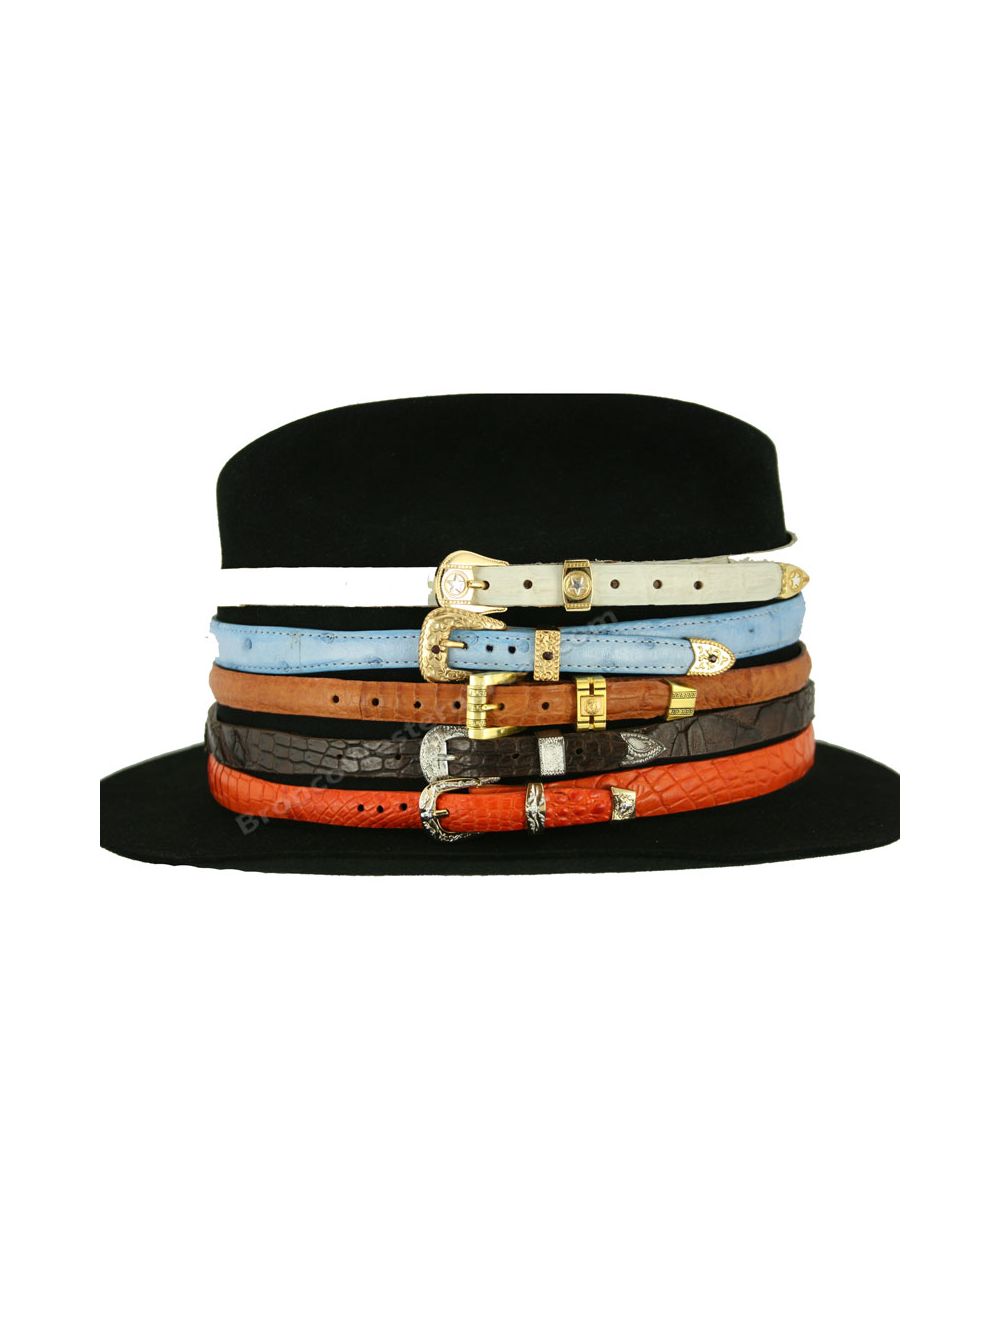 HAT BANDS MADE OF EXOTIC SKINS